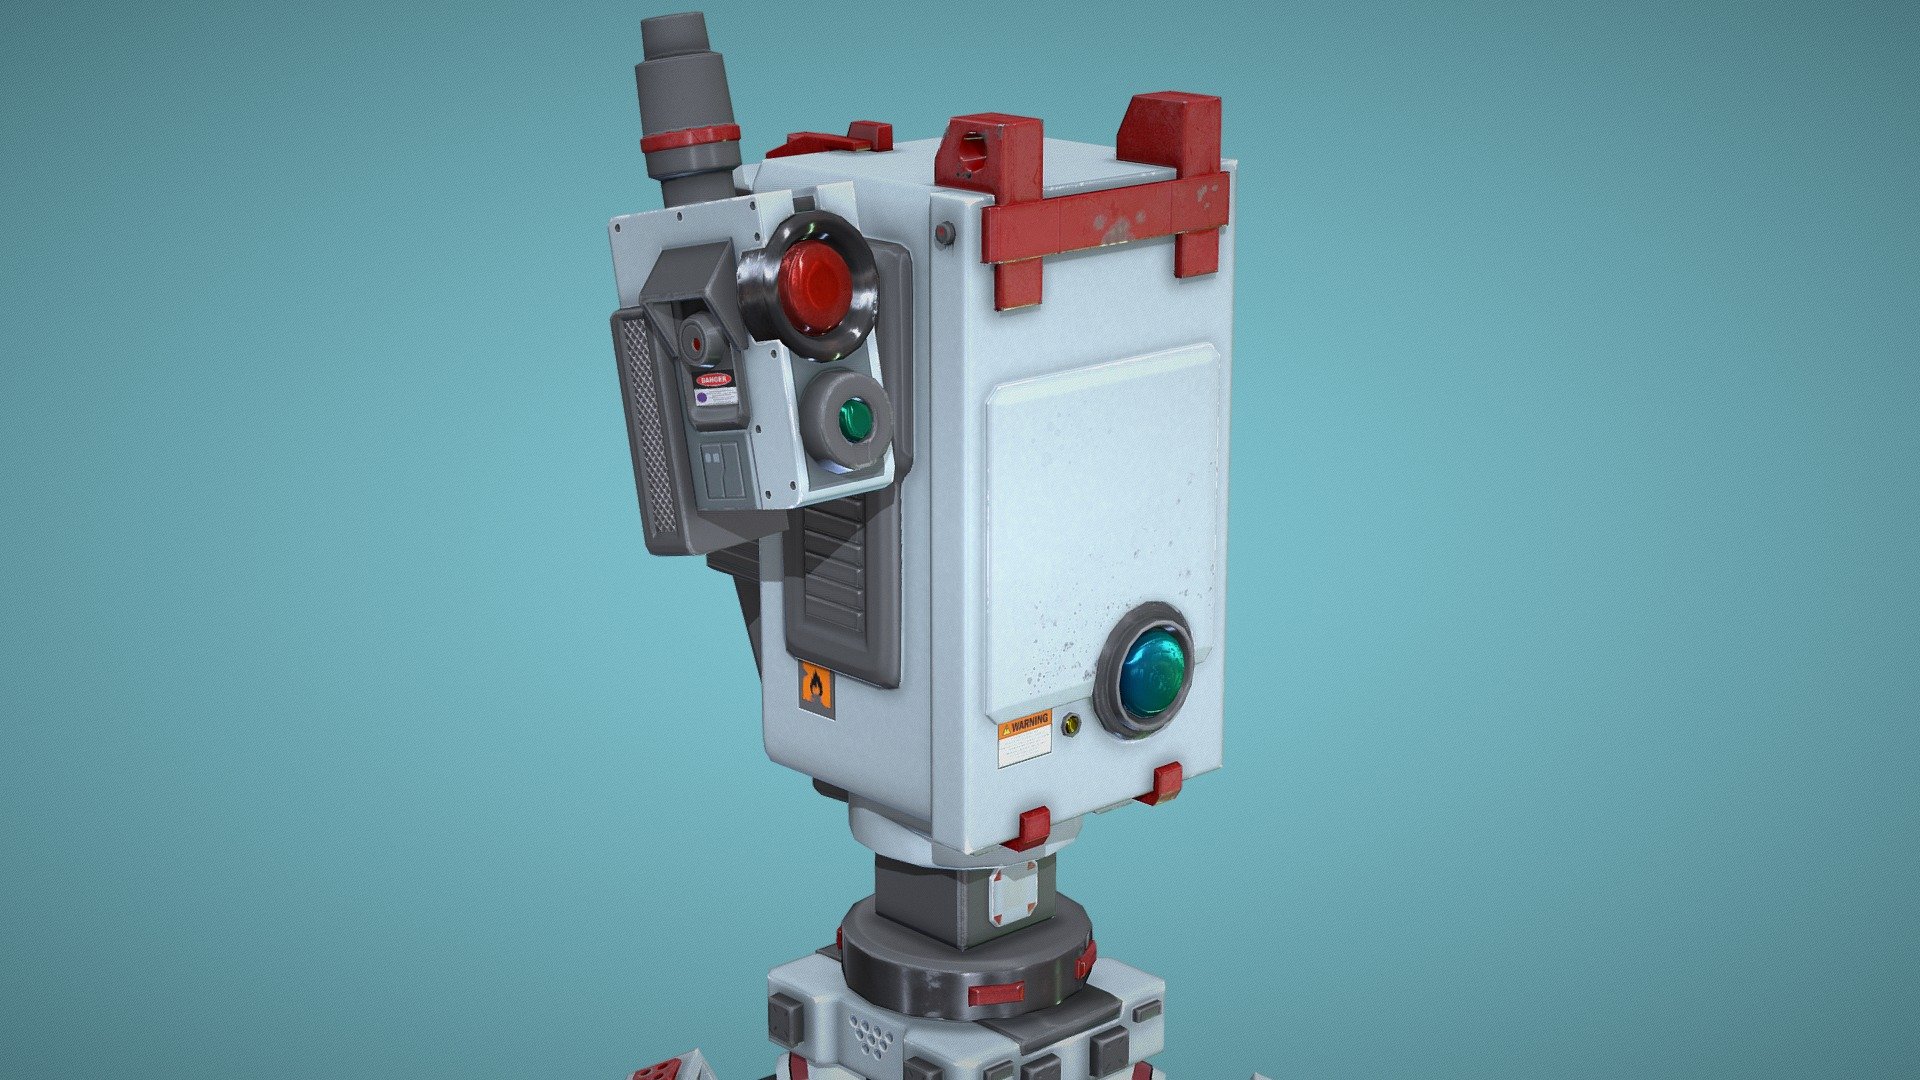 Game Ready Model with animation.

Modeling was done in Blender, baking in Marmoset Toolbag, texturing in Substance Painter.
You can find renders at my Artstation https://www.artstation.com/kjloyh

Original concept art made by Tobias Pearce https://www.artstation.com/artwork/OmlnJ
 - Communication Bot - Download Free 3D model by Valery Kharitonov (@KJLOYH) 3d model